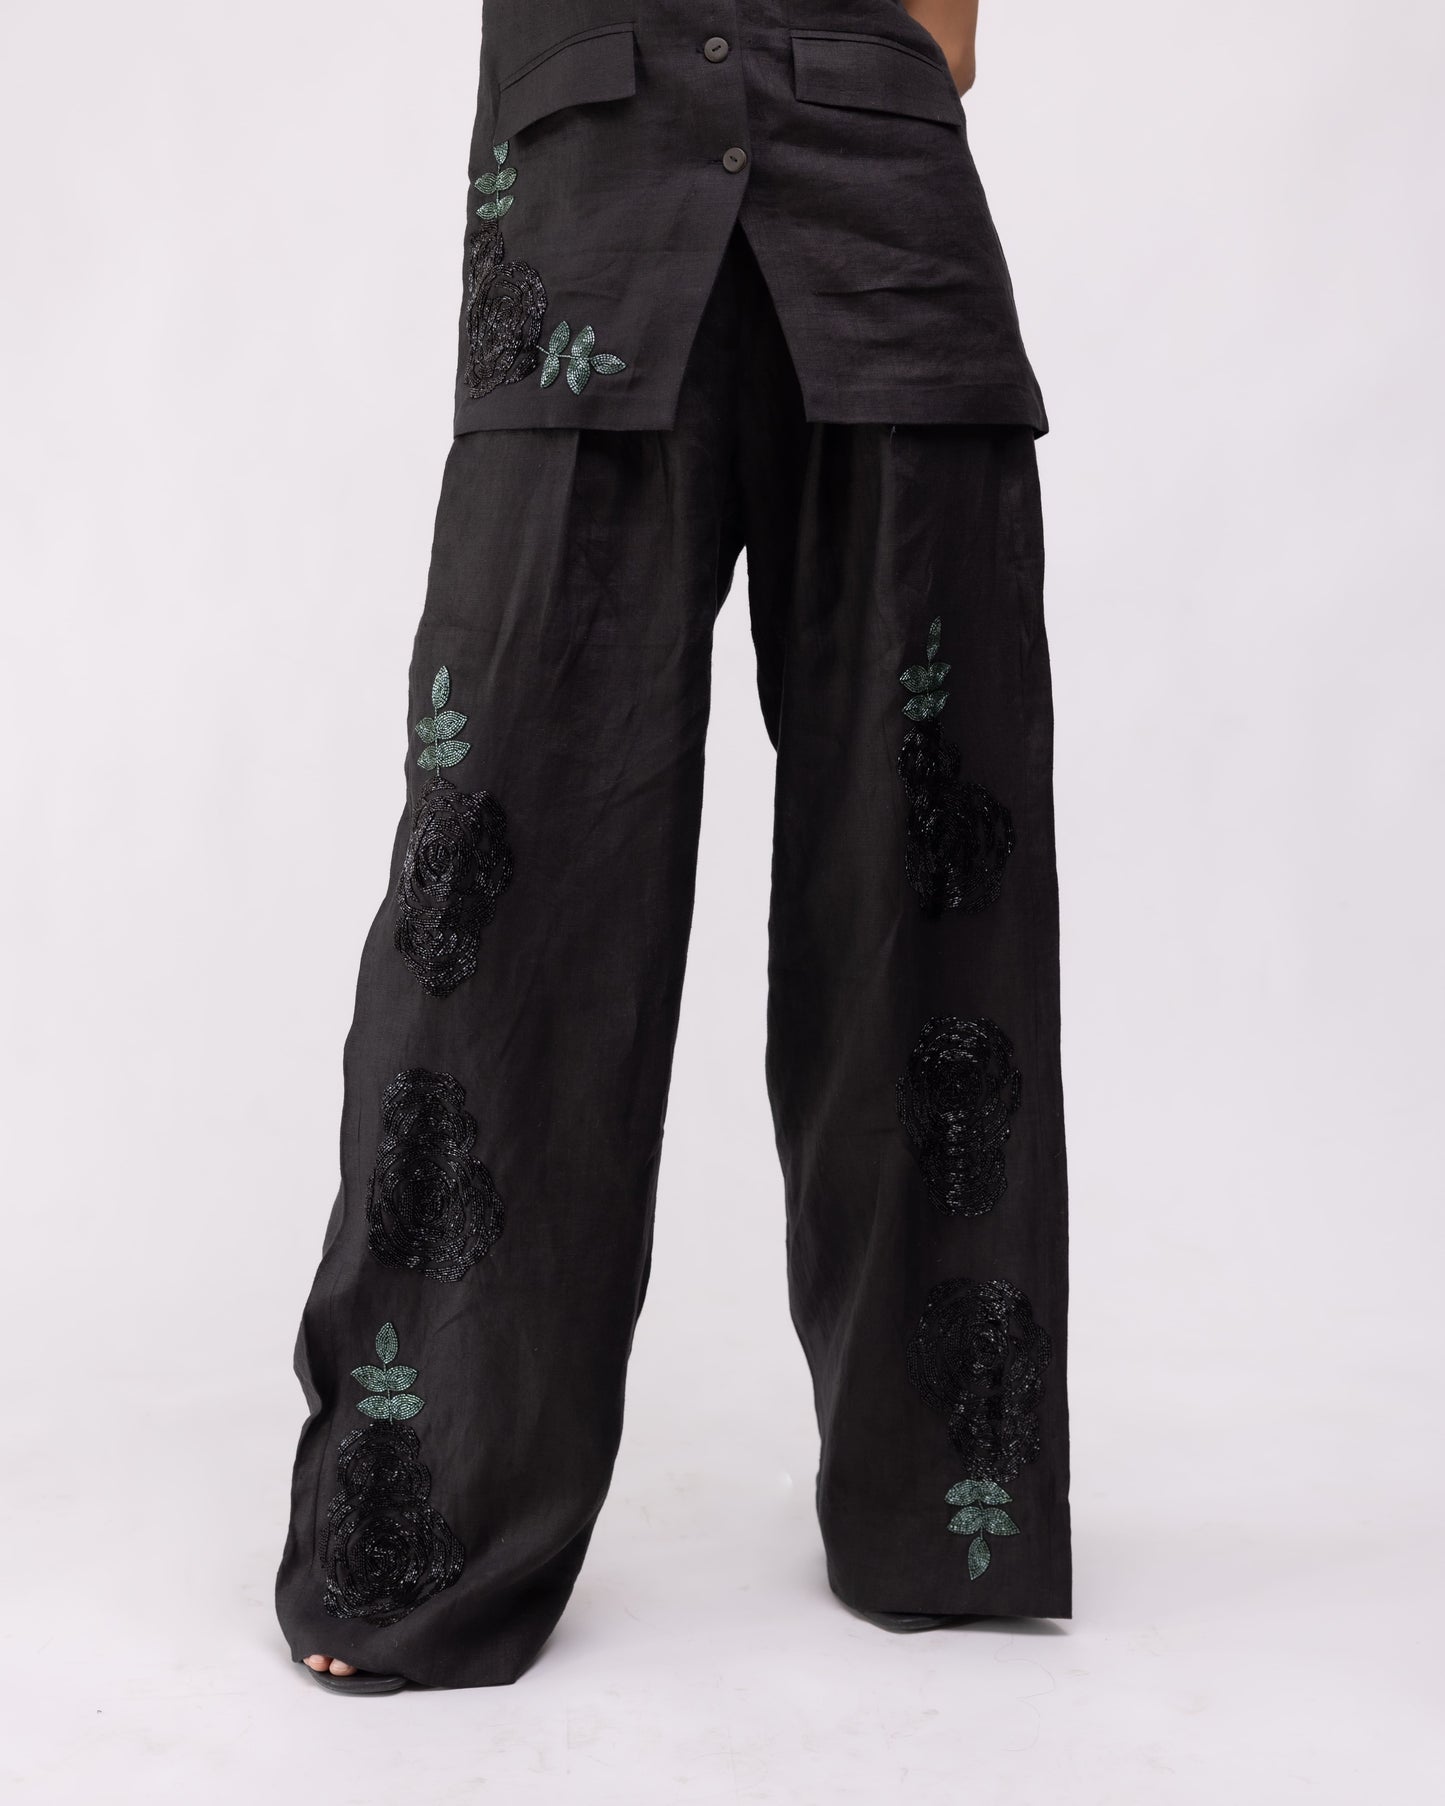 100% linen high-waisted trousers with hand-embroidery